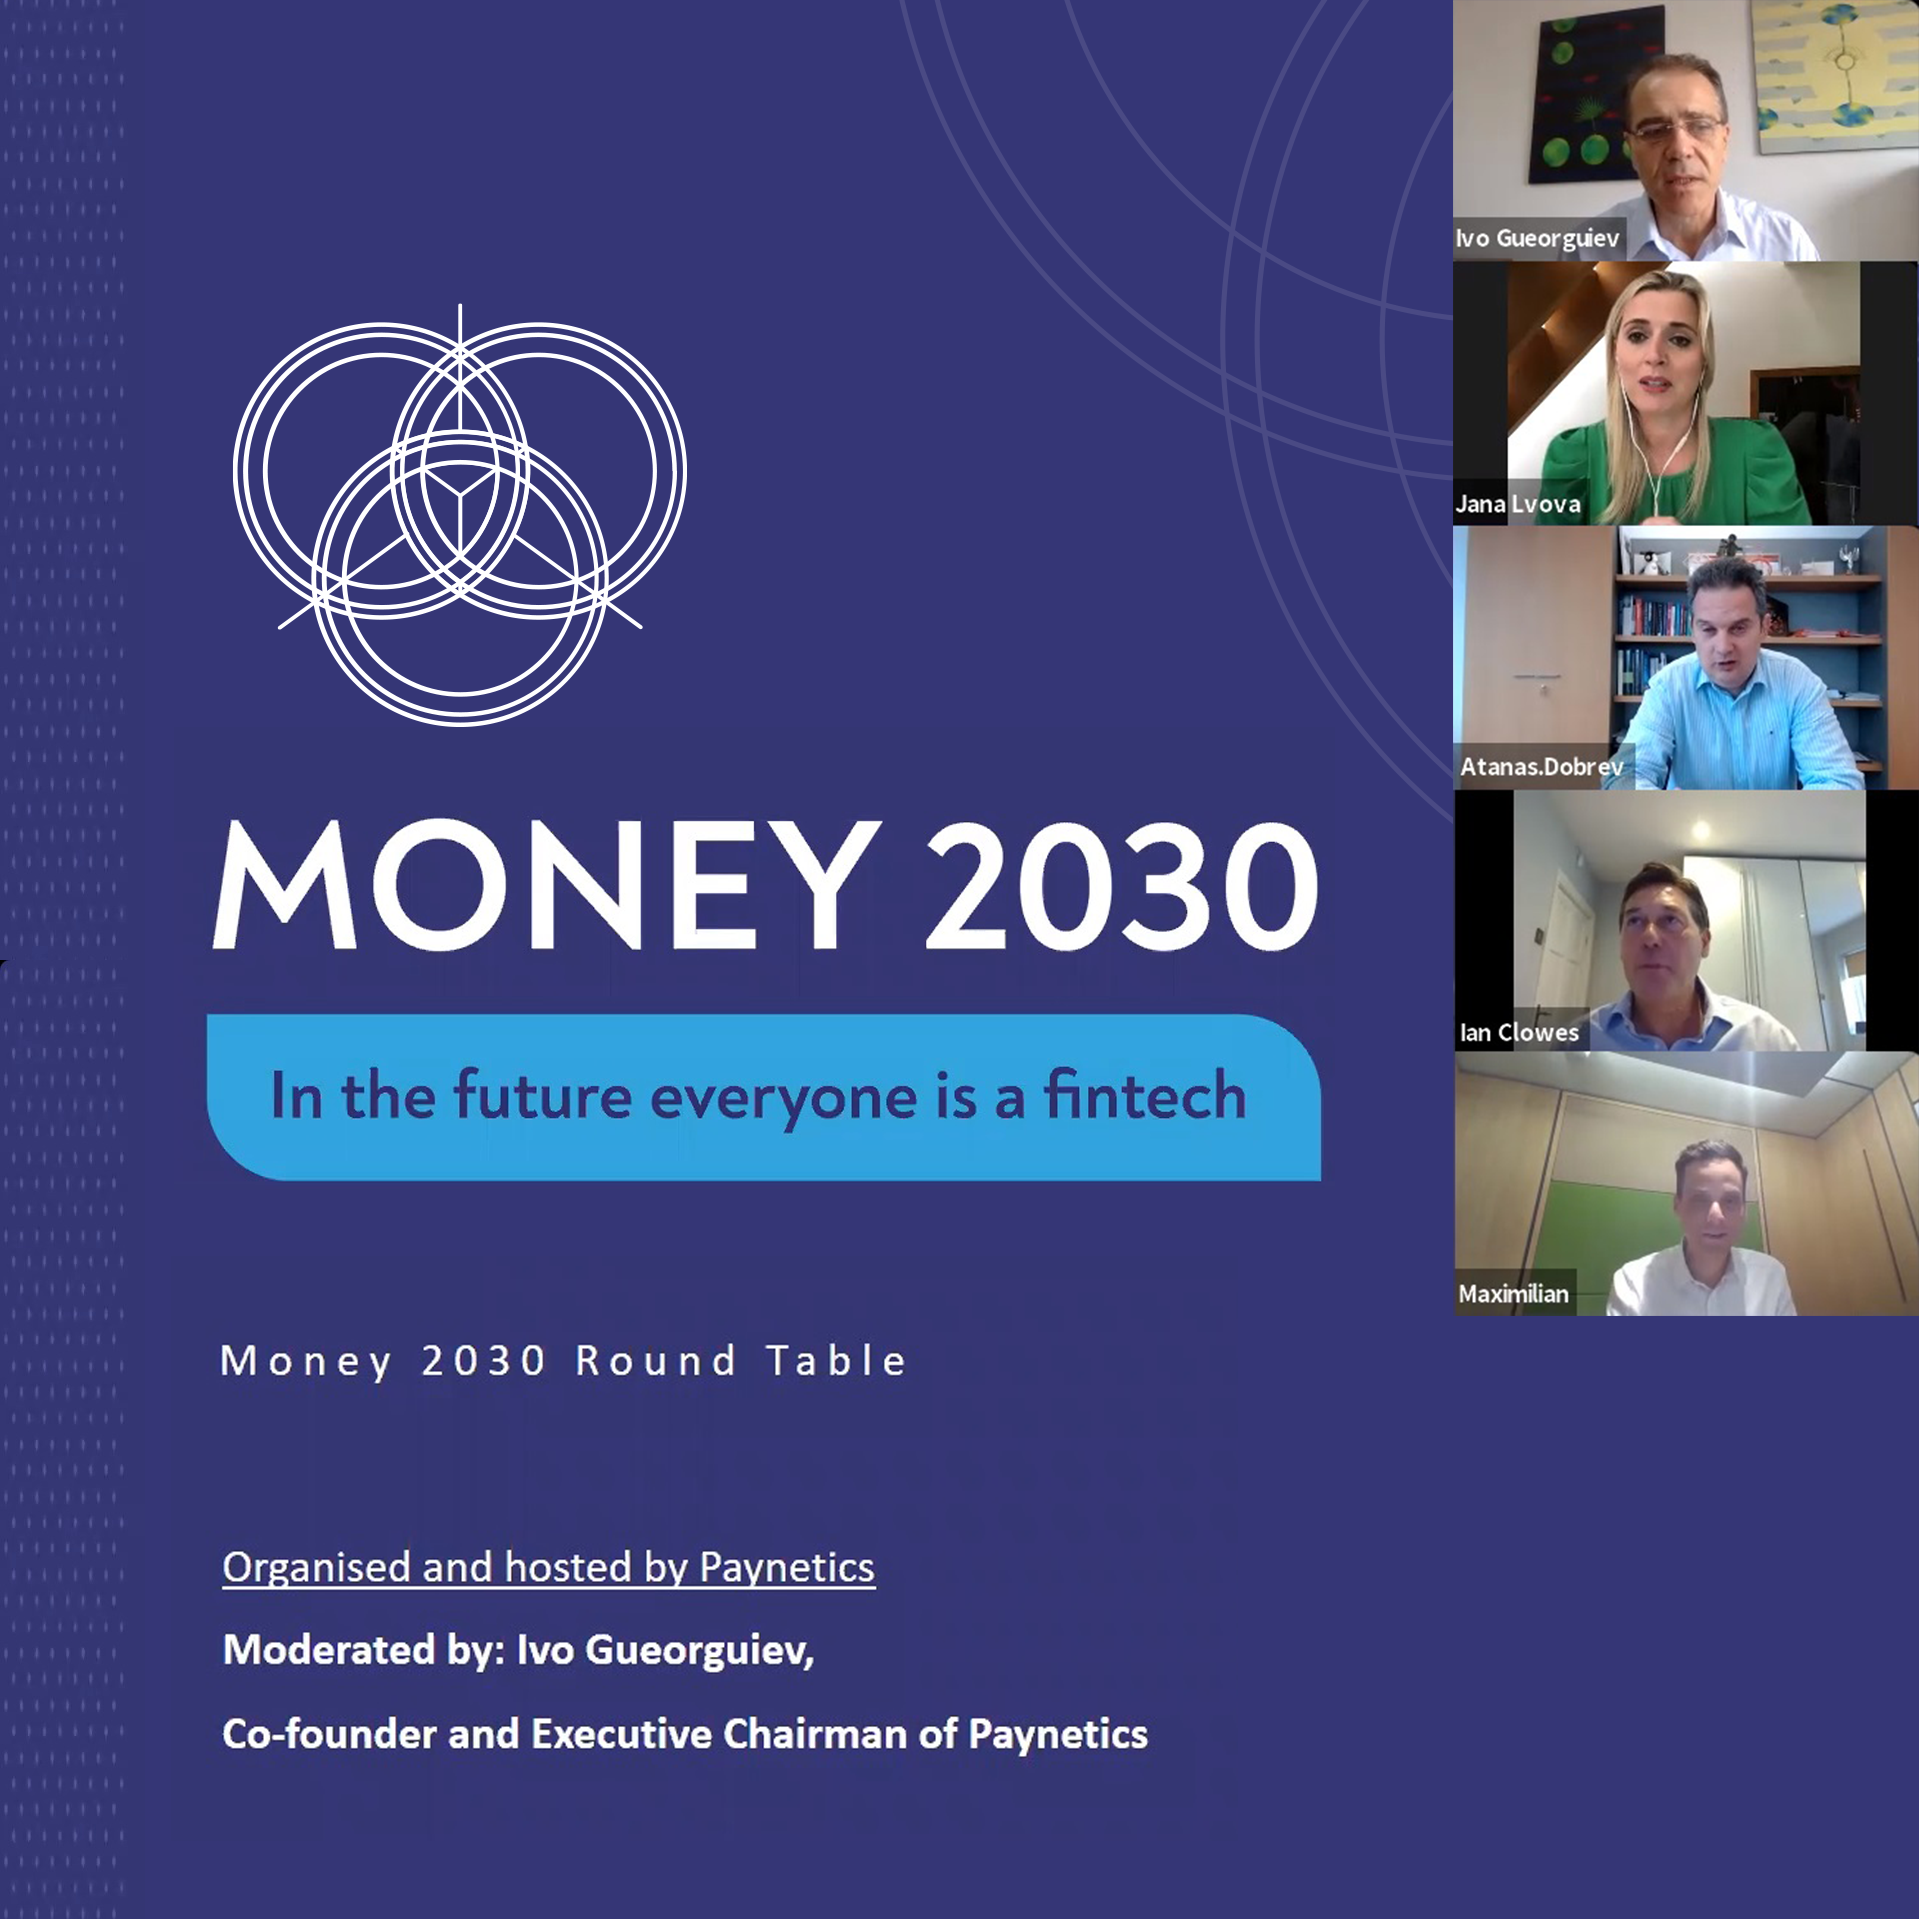 Thoughts from our experts at our Money 2030 event – What the future of fintech looks like